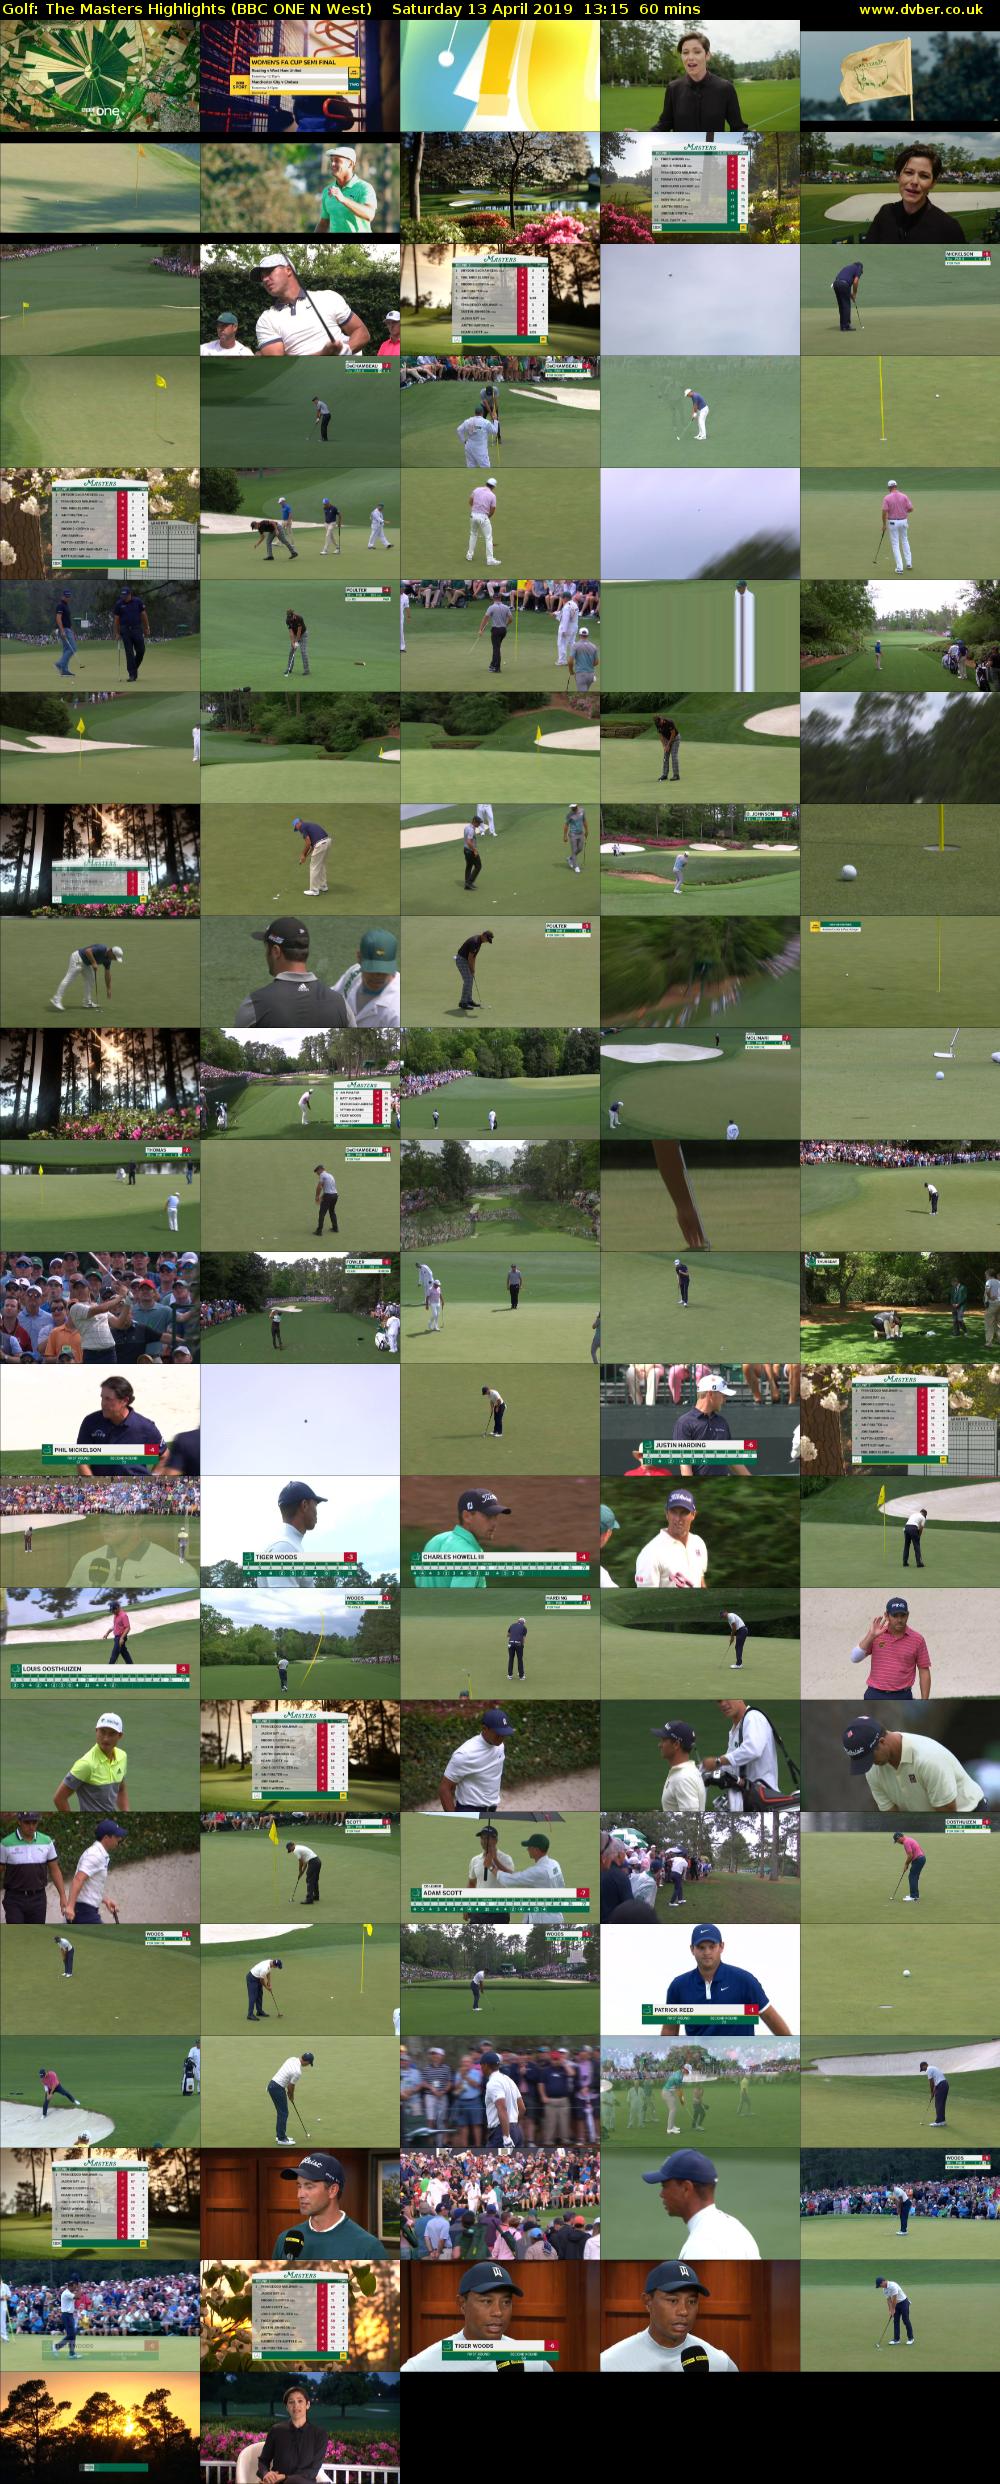 Golf: The Masters Highlights (BBC ONE N West) Saturday 13 April 2019 13:15 - 14:15